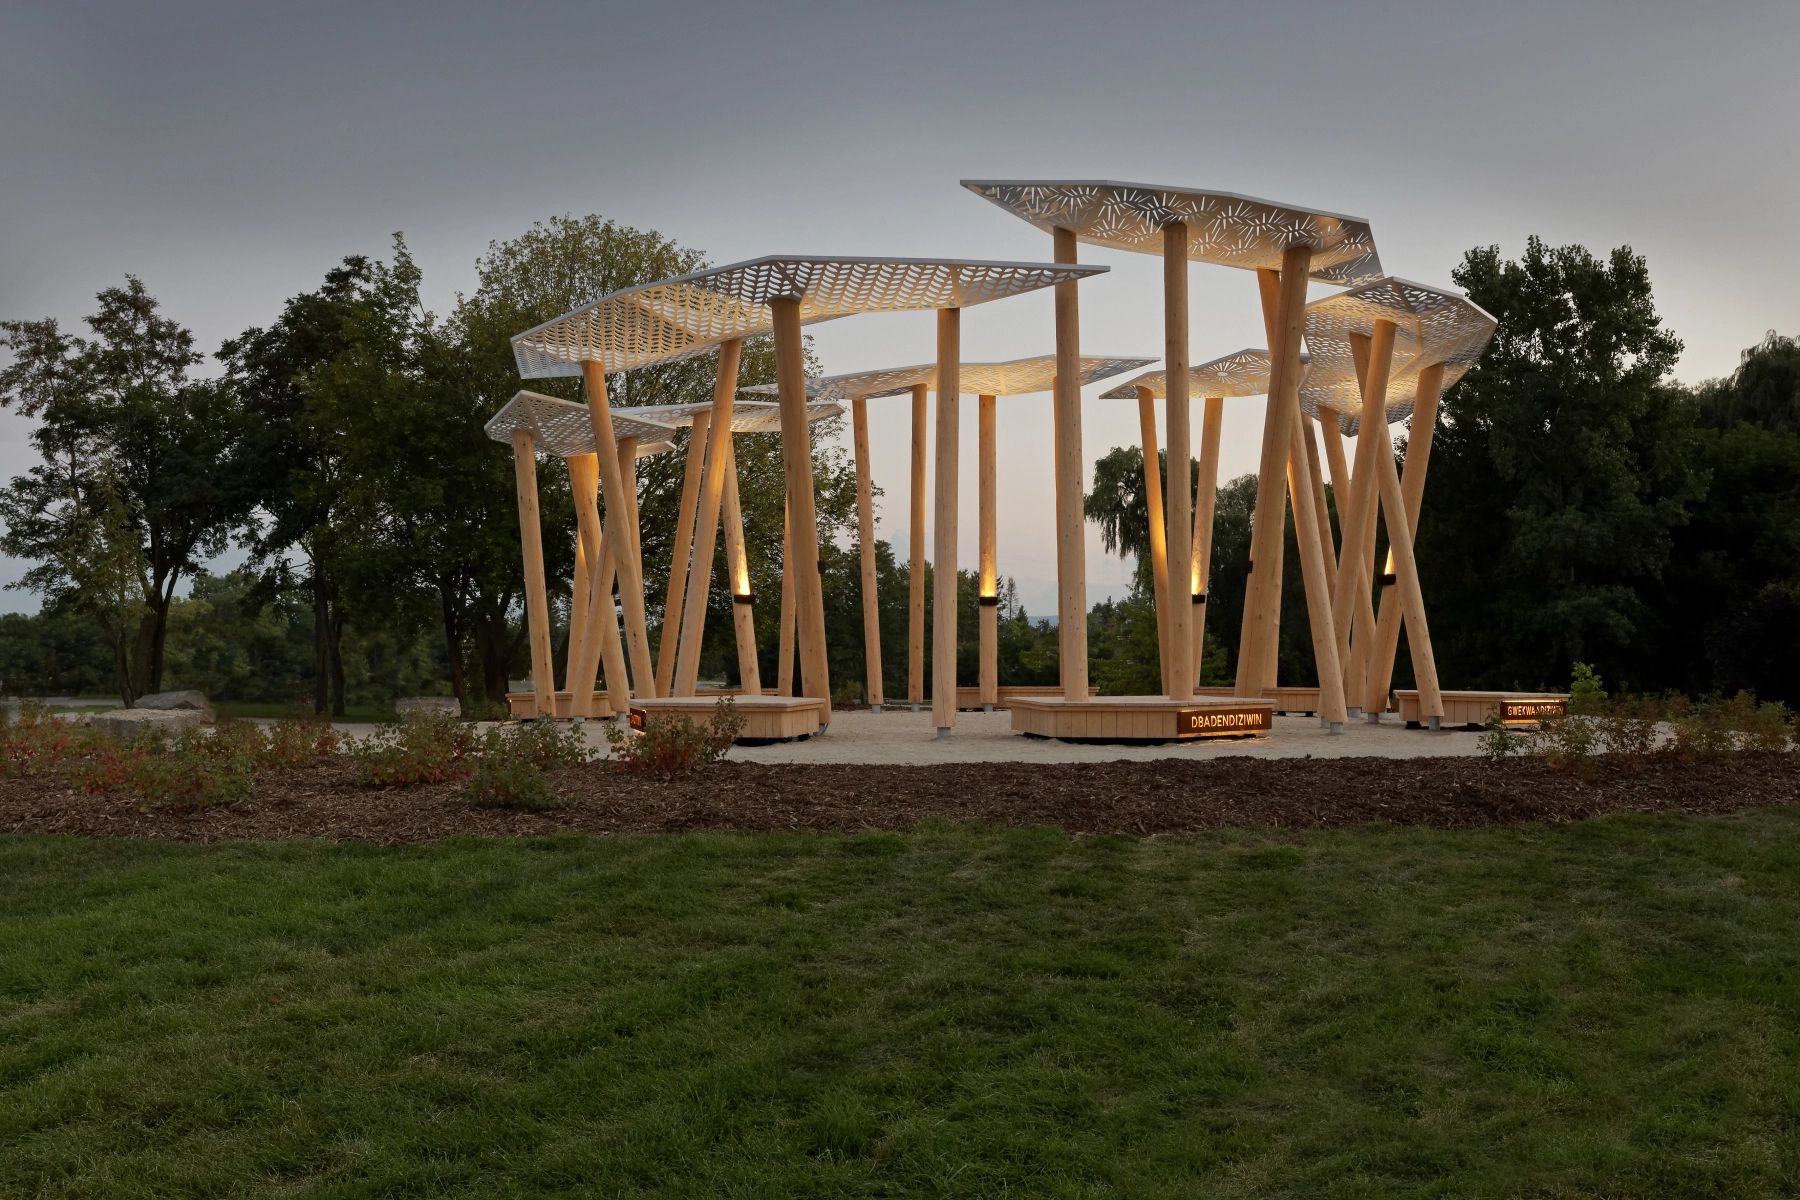 Each of the steel canopies of the Awen’ Gathering Place represents one of the Seven Ancestor Teaching and an associated level of the food forest. Photos: David Whittaker